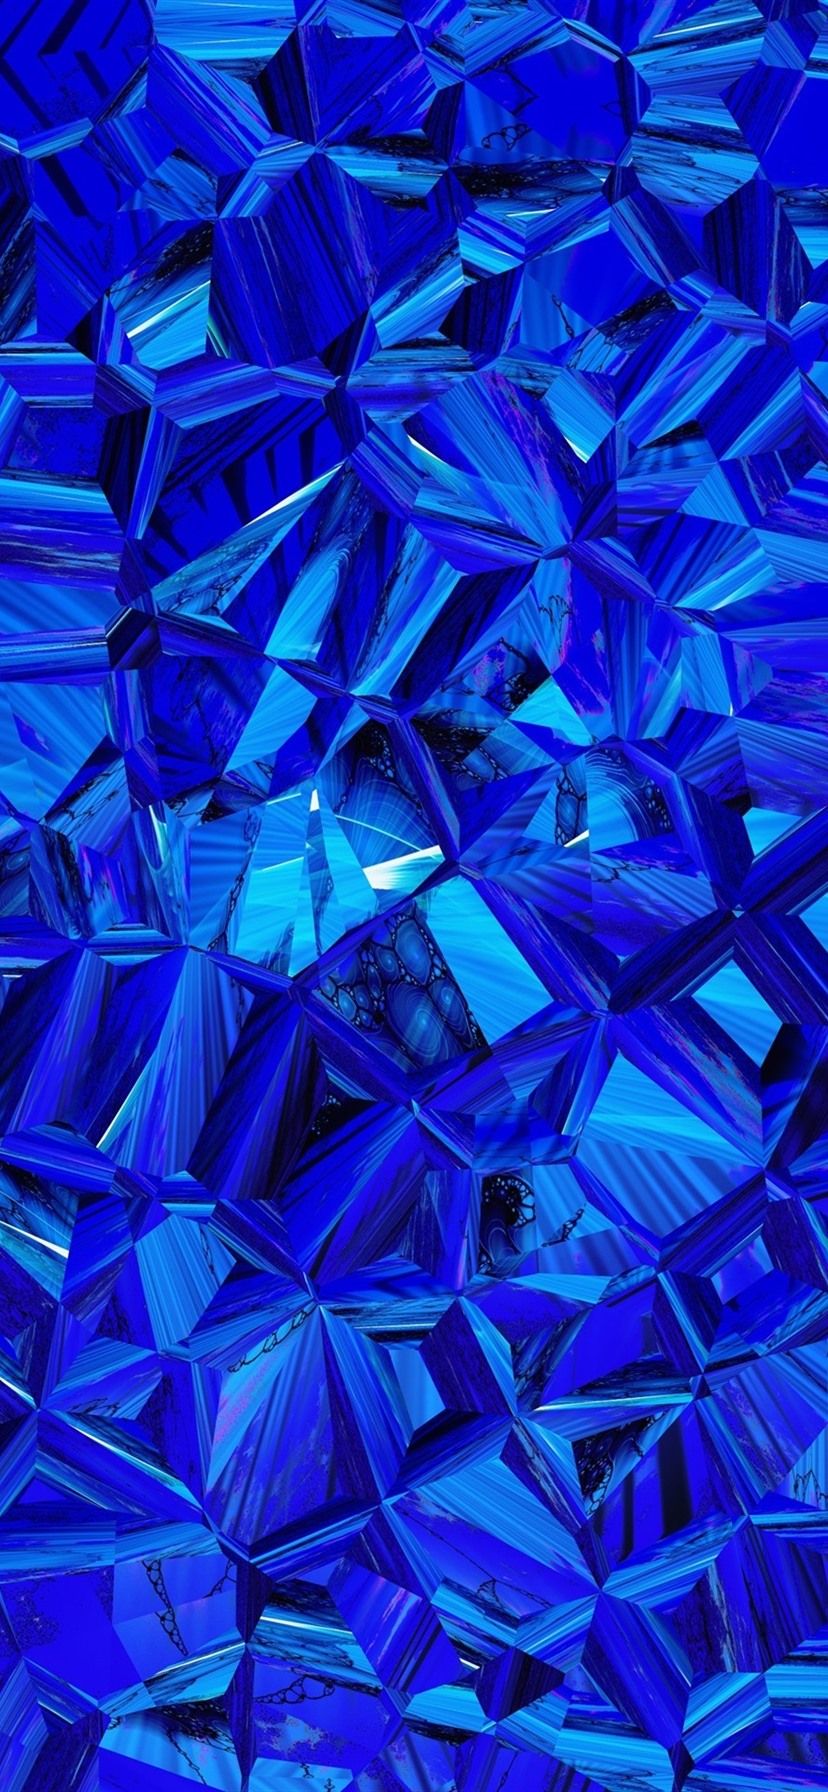 Wallpaper Blue prismatic, abstract picture 3840x2160 UHD 4K